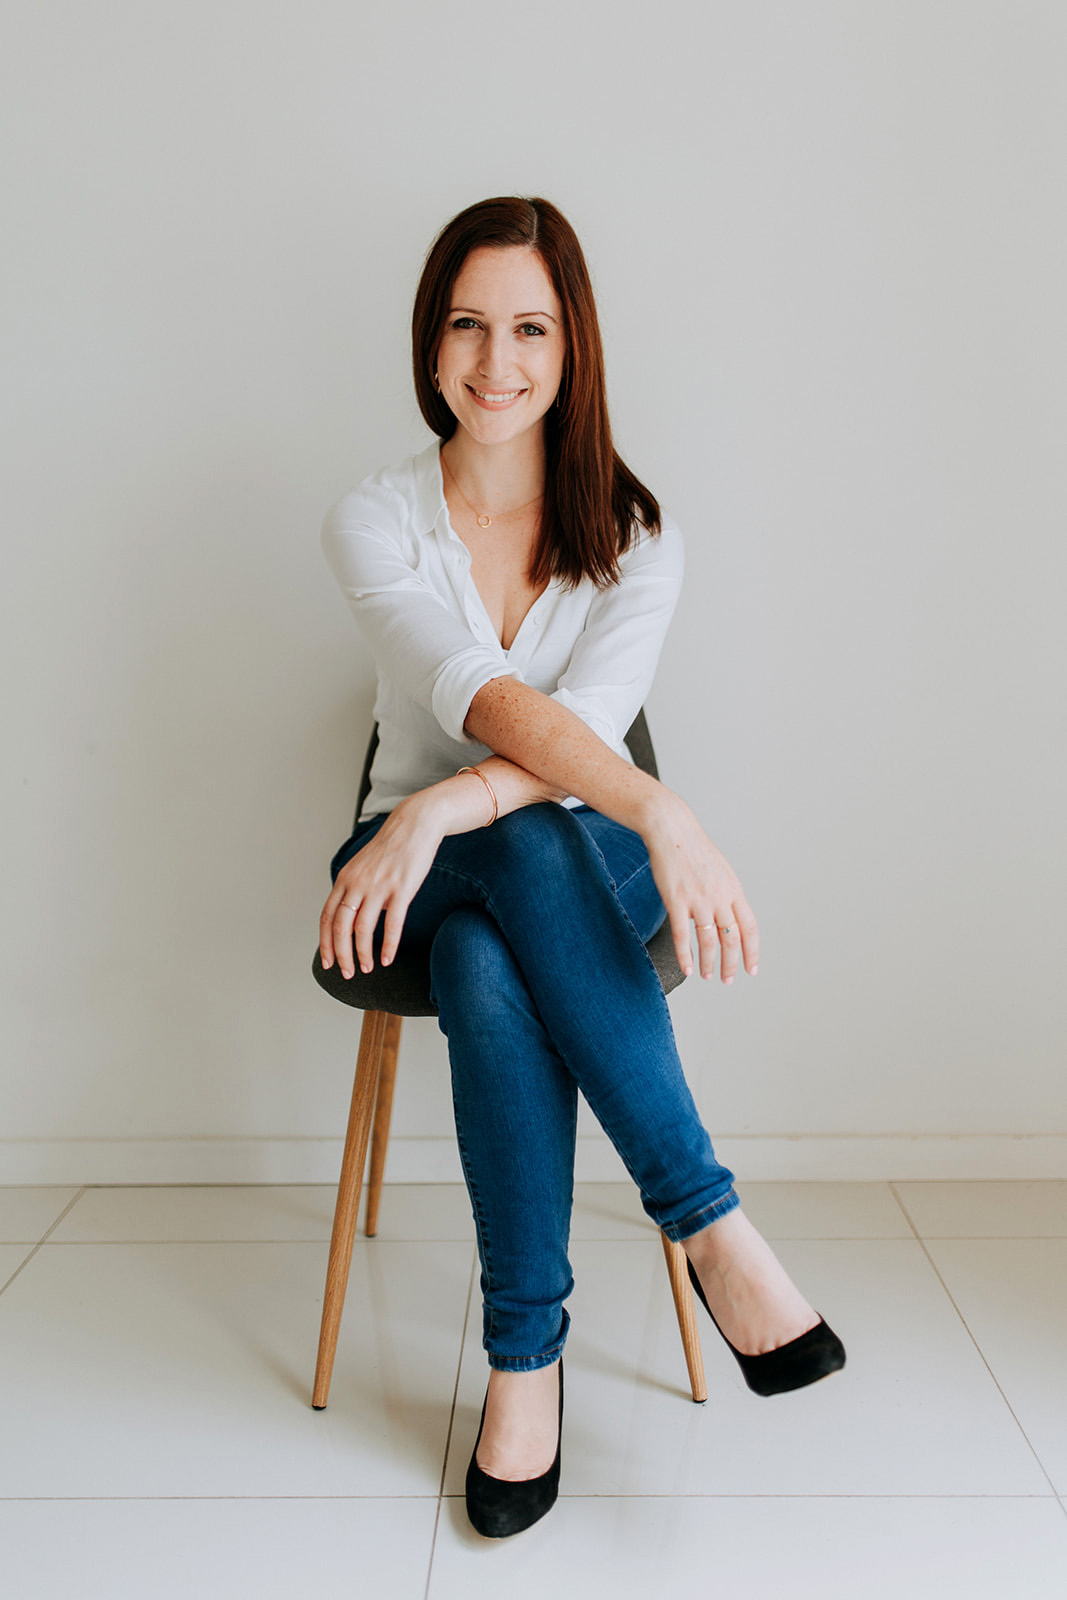 A photo of Ally. She is a white woman in her early thirties with brown hair. She is wearing a white blouse and blue jeans. She is sitting on a chair against a plain white wall. She is smiling.